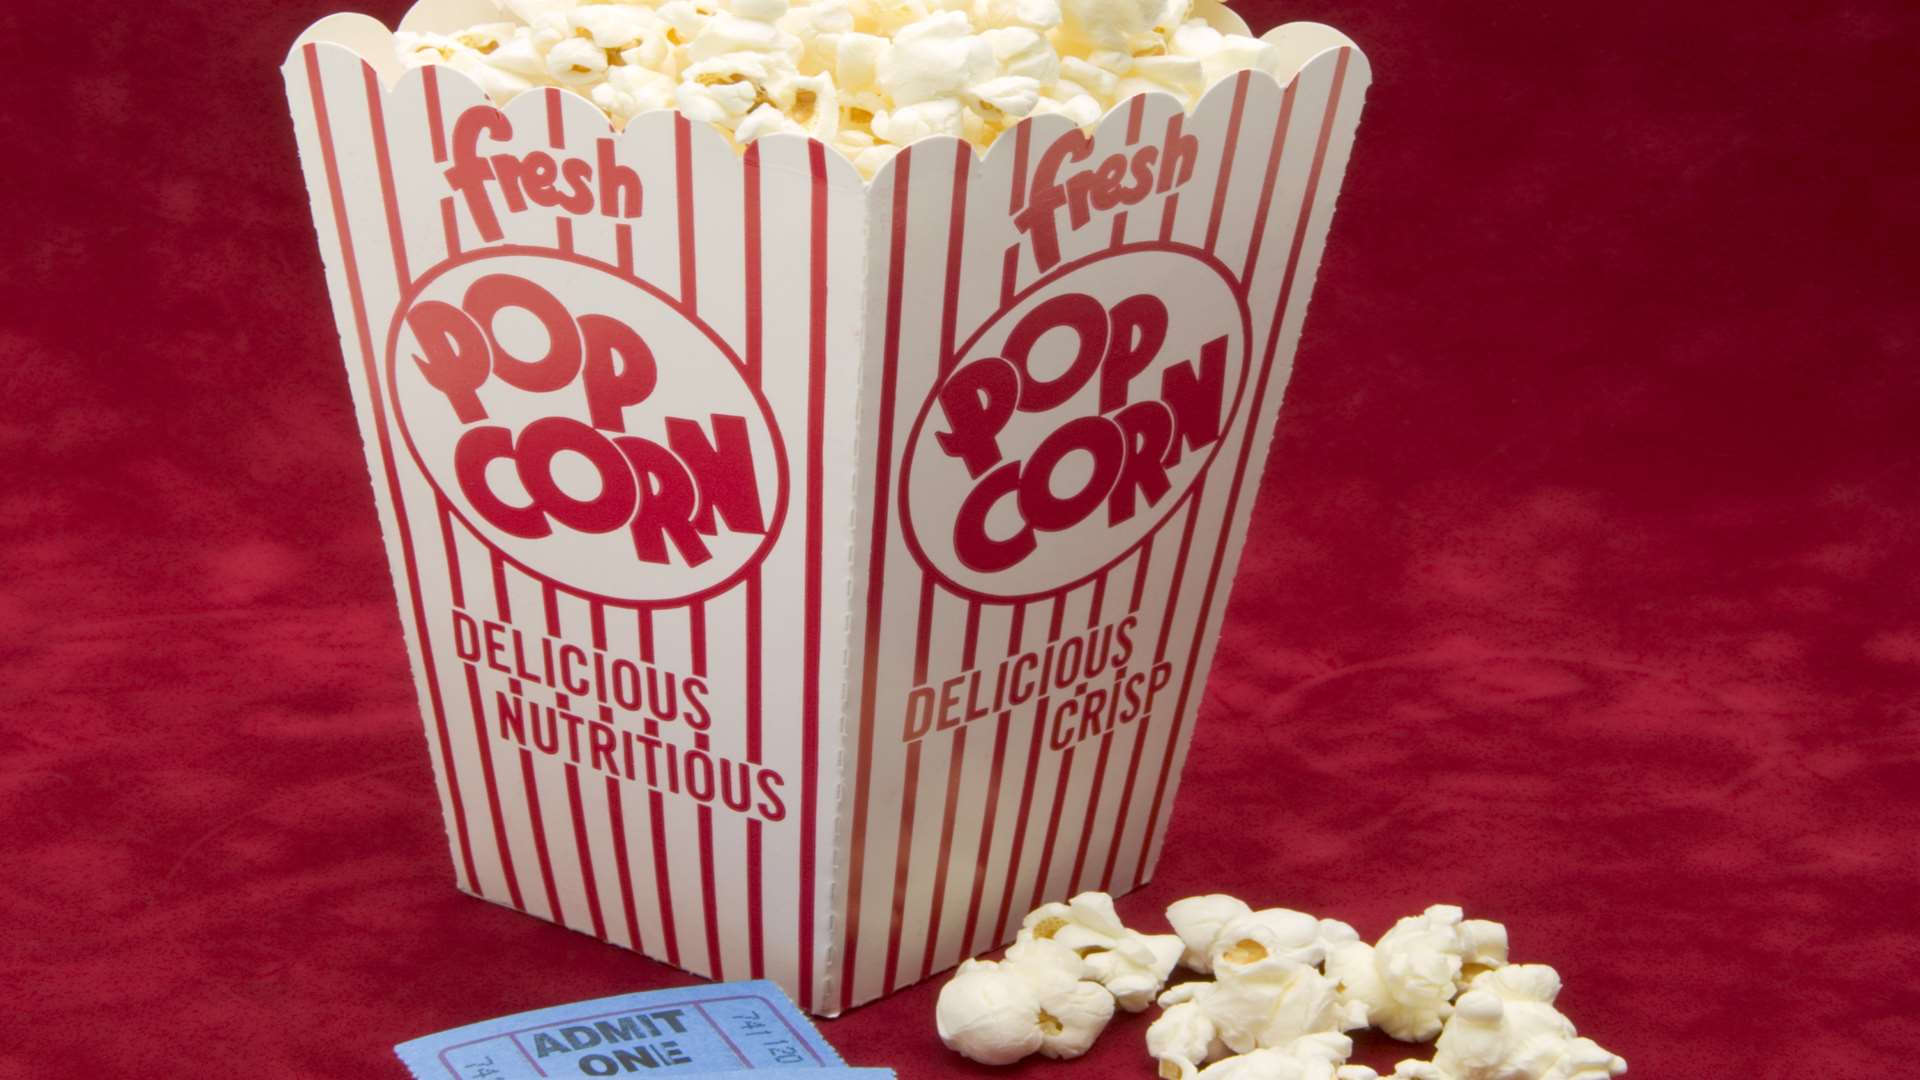 Join a kids club cinema screening for cheaper tickets